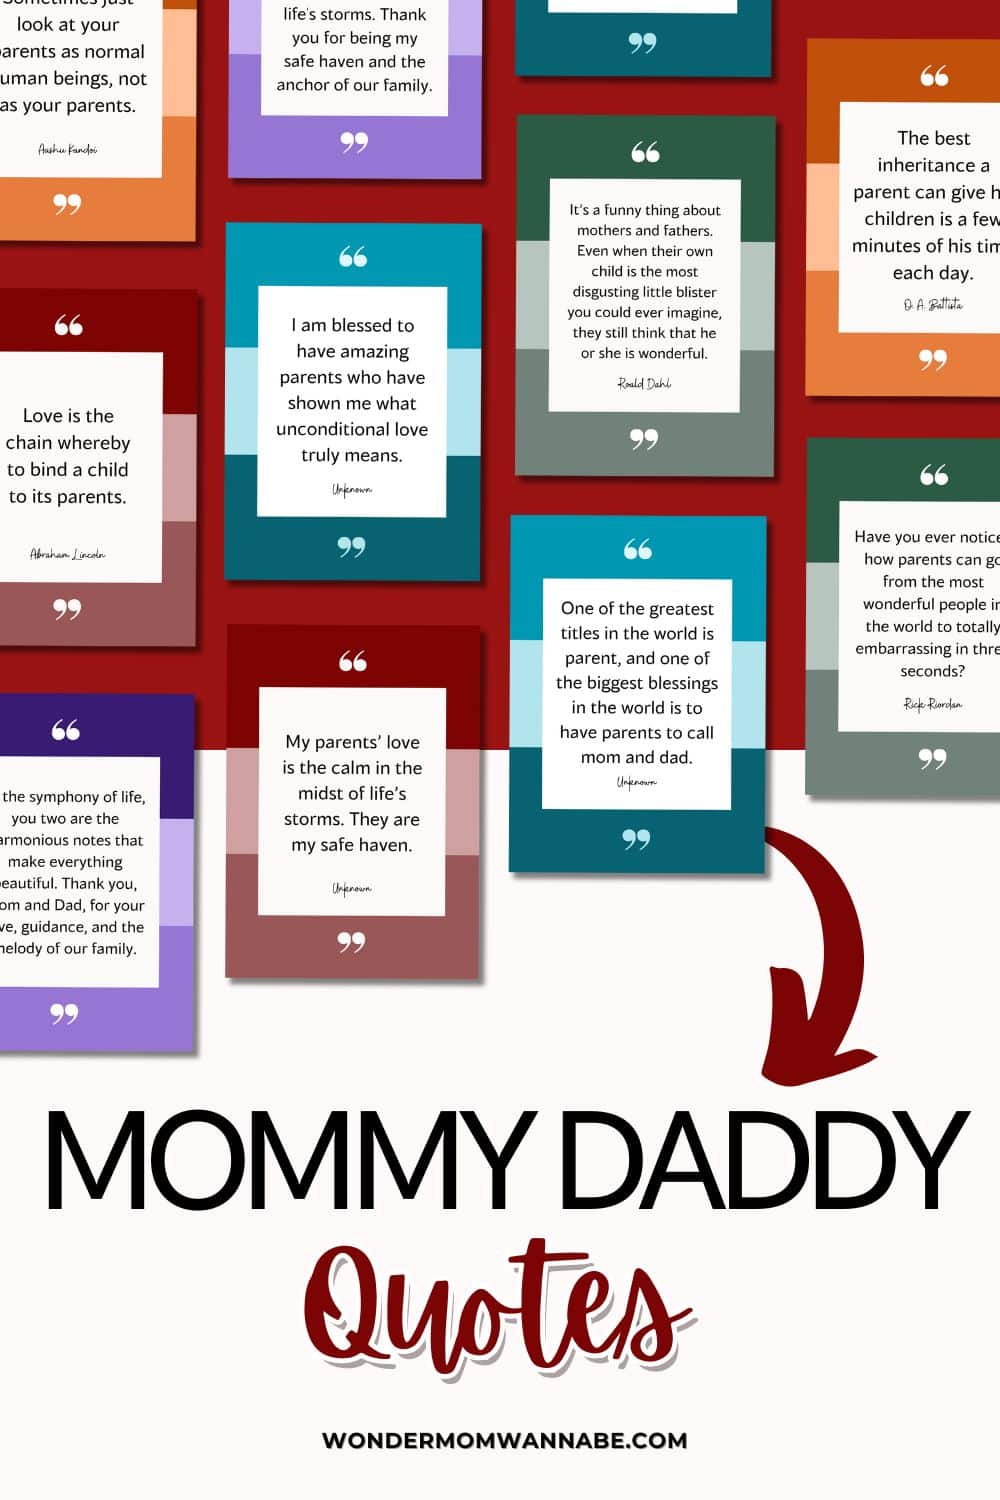 Mommy and daddy quotes on a vibrant red background.